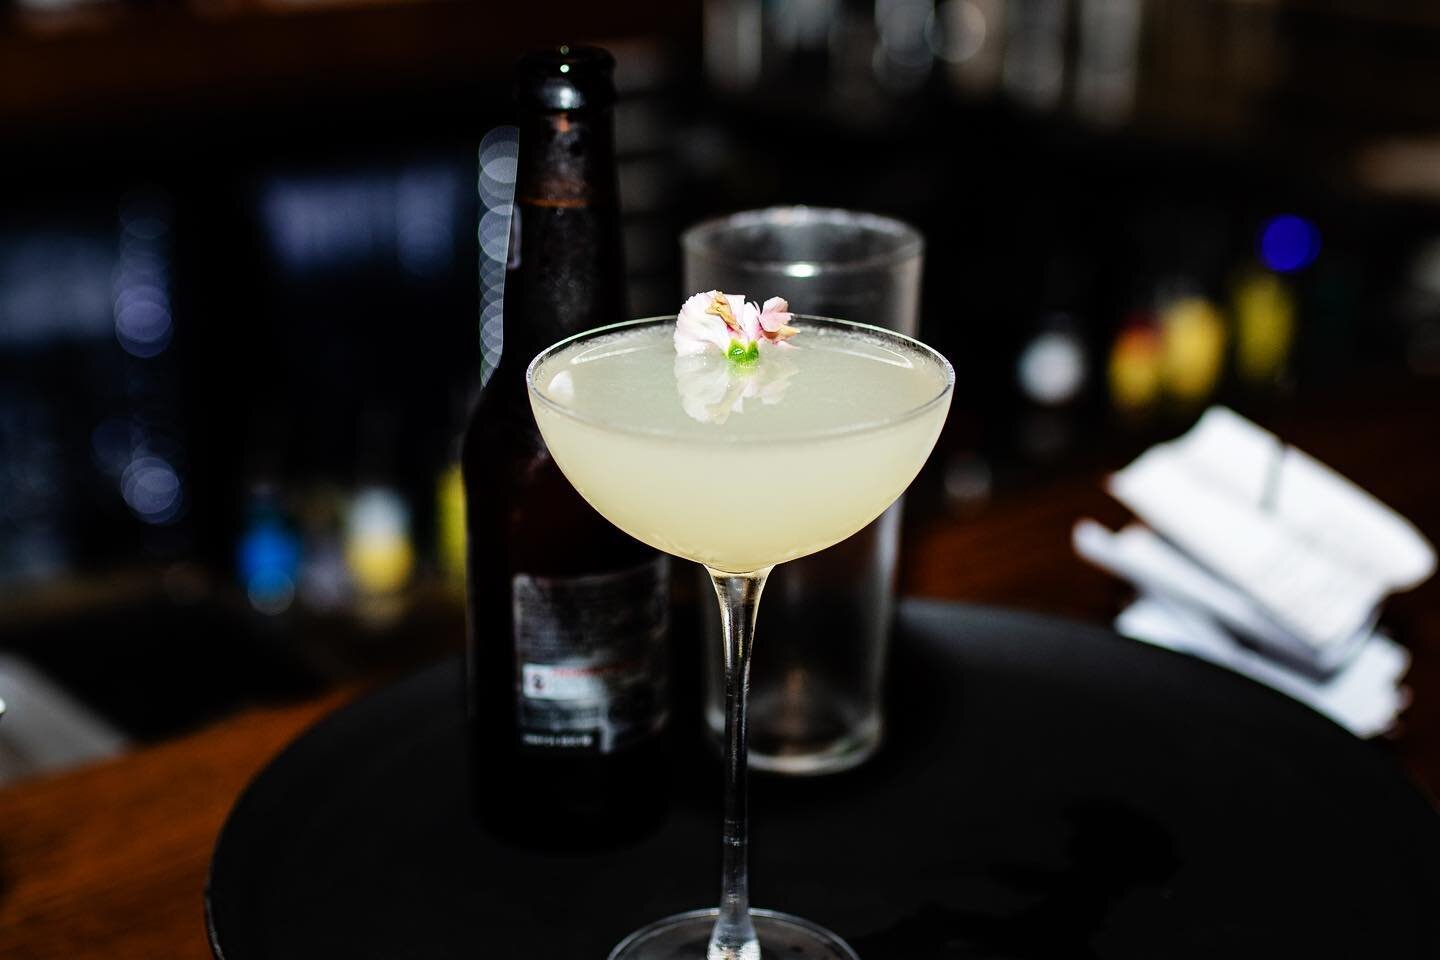 With a crafted and delicate balance of flavour, this cloudy apple and rose infused lychee martini is to die for.. 🍸 
Ask your bartender or server for the RAICHI BARRA MARTINI.. it&rsquo;s something to shout about 🖤🖤

#byronbay #byron #byronfood #b